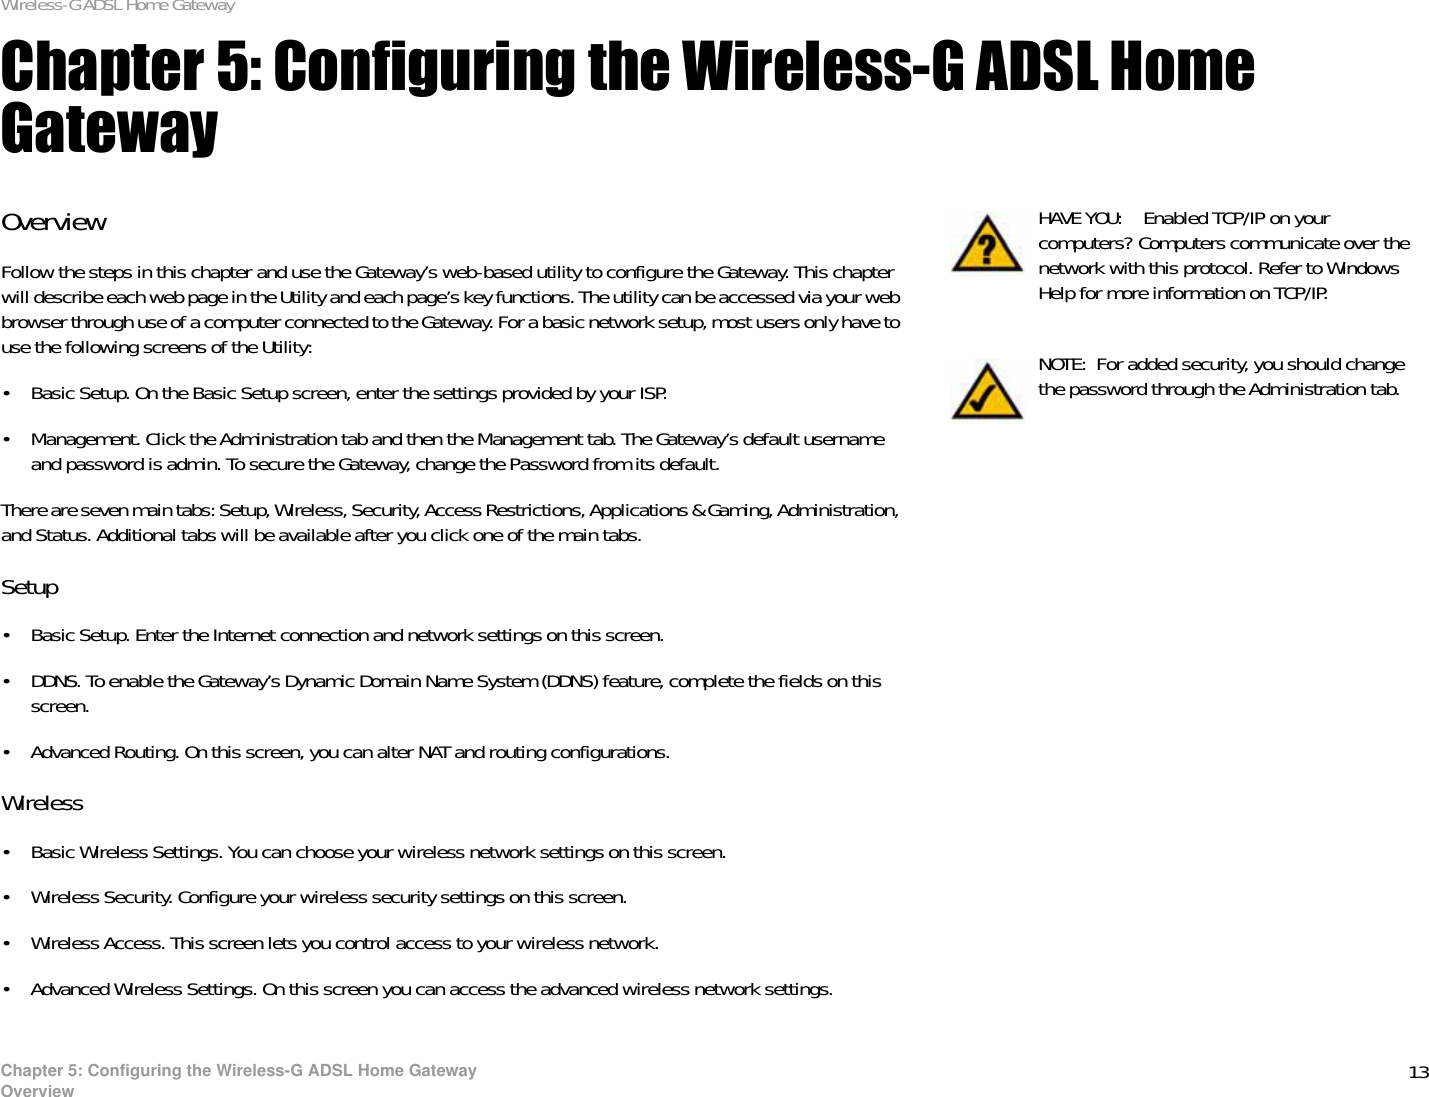 13Chapter 5: Configuring the Wireless-G ADSL Home GatewayOverviewWireless-G ADSL Home GatewayChapter 5: Configuring the Wireless-G ADSL Home GatewayOverviewFollow the steps in this chapter and use the Gateway’s web-based utility to configure the Gateway. This chapter will describe each web page in the Utility and each page’s key functions. The utility can be accessed via your web browser through use of a computer connected to the Gateway. For a basic network setup, most users only have to use the following screens of the Utility:• Basic Setup. On the Basic Setup screen, enter the settings provided by your ISP.• Management. Click the Administration tab and then the Management tab. The Gateway’s default username and password is admin. To secure the Gateway, change the Password from its default.There are seven main tabs: Setup, Wireless, Security, Access Restrictions, Applications &amp; Gaming, Administration, and Status. Additional tabs will be available after you click one of the main tabs.Setup• Basic Setup. Enter the Internet connection and network settings on this screen.• DDNS. To enable the Gateway’s Dynamic Domain Name System (DDNS) feature, complete the fields on this screen.• Advanced Routing. On this screen, you can alter NAT and routing configurations.Wireless• Basic Wireless Settings. You can choose your wireless network settings on this screen.• Wireless Security. Configure your wireless security settings on this screen.• Wireless Access. This screen lets you control access to your wireless network.• Advanced Wireless Settings. On this screen you can access the advanced wireless network settings.NOTE: For added security, you should change the password through the Administration tab.HAVE YOU: Enabled TCP/IP on your computers? Computers communicate over the network with this protocol. Refer to Windows Help for more information on TCP/IP.